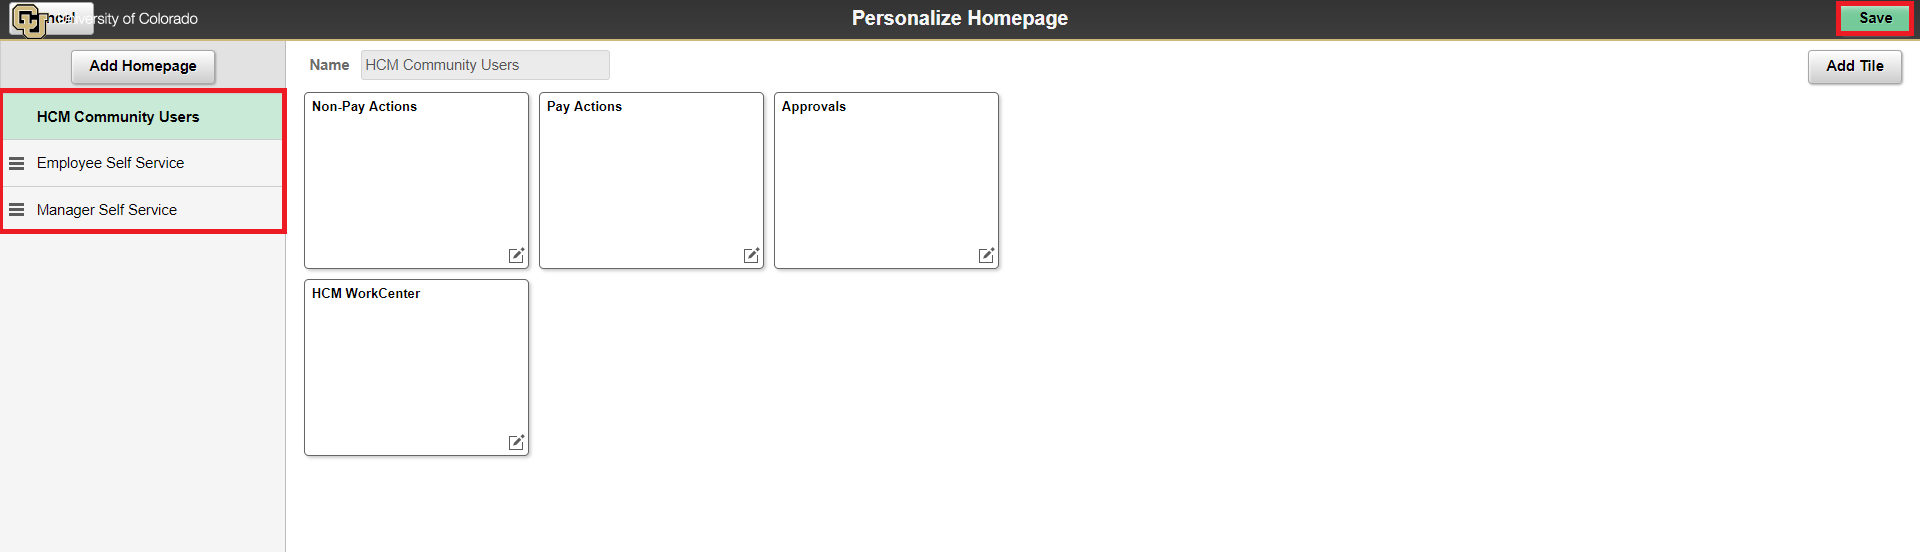 Personalize Homepage